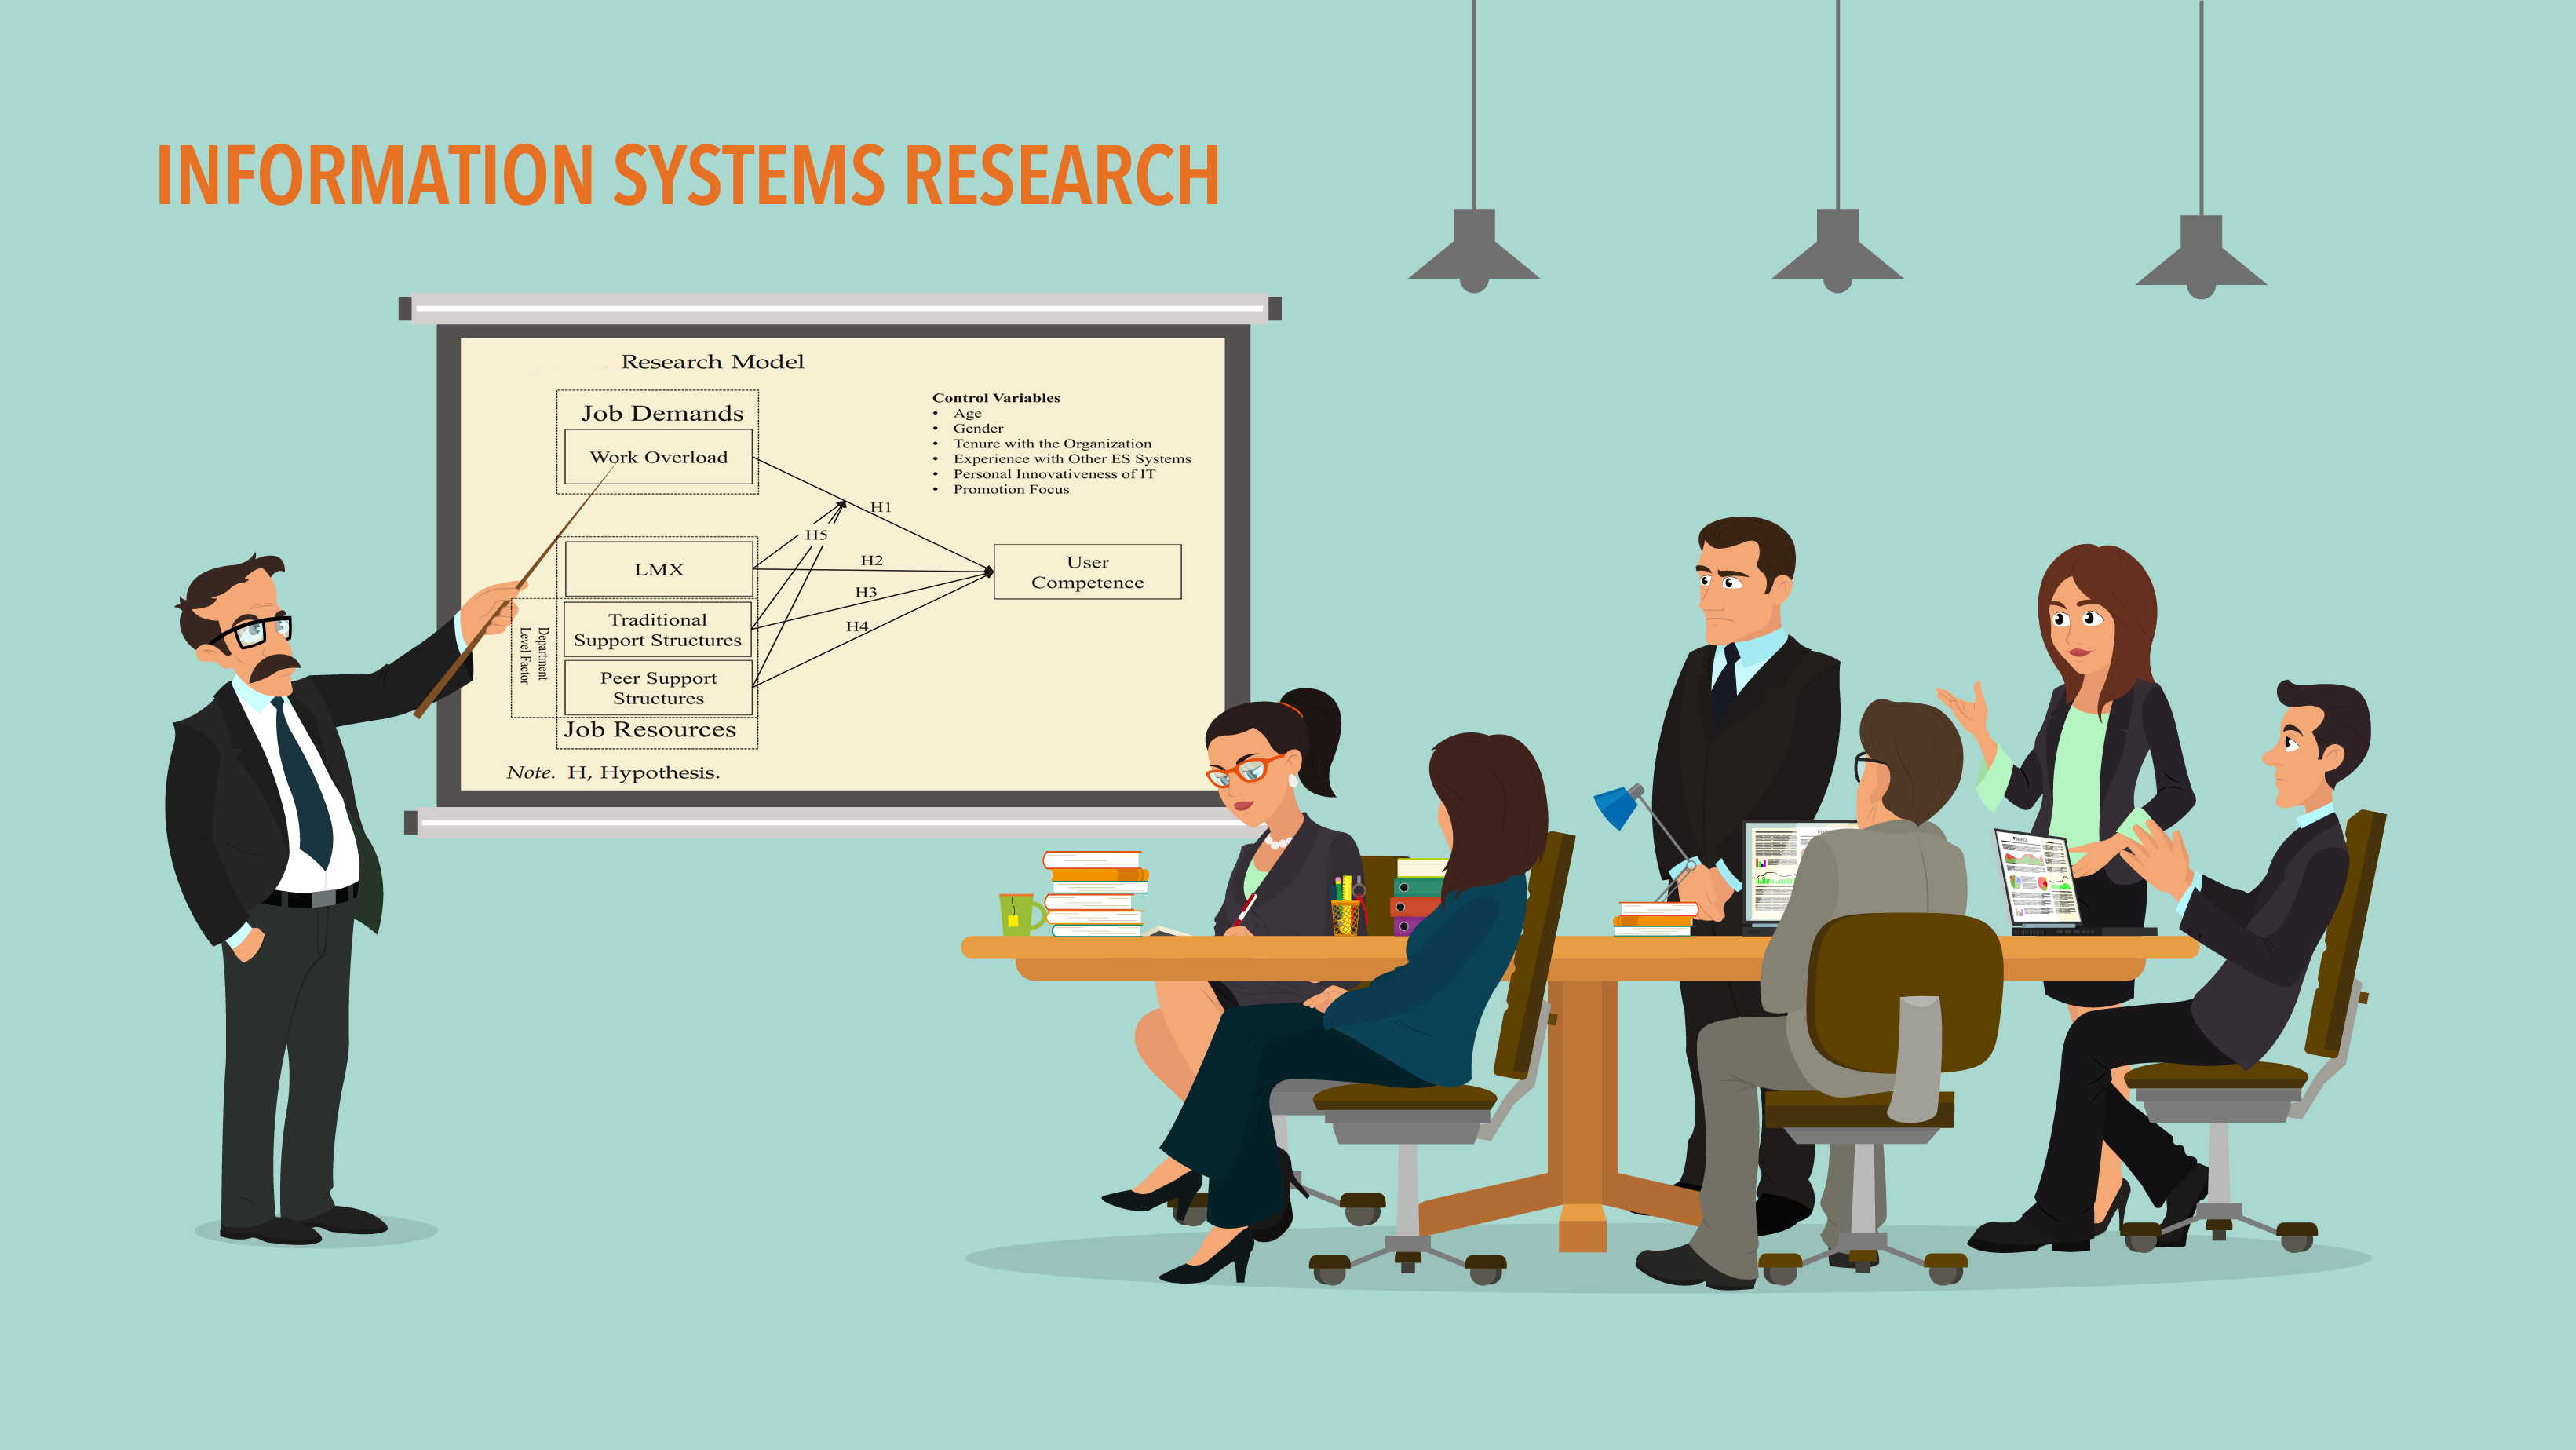 New insights into work environment factors affecting user competence with enterprise systems